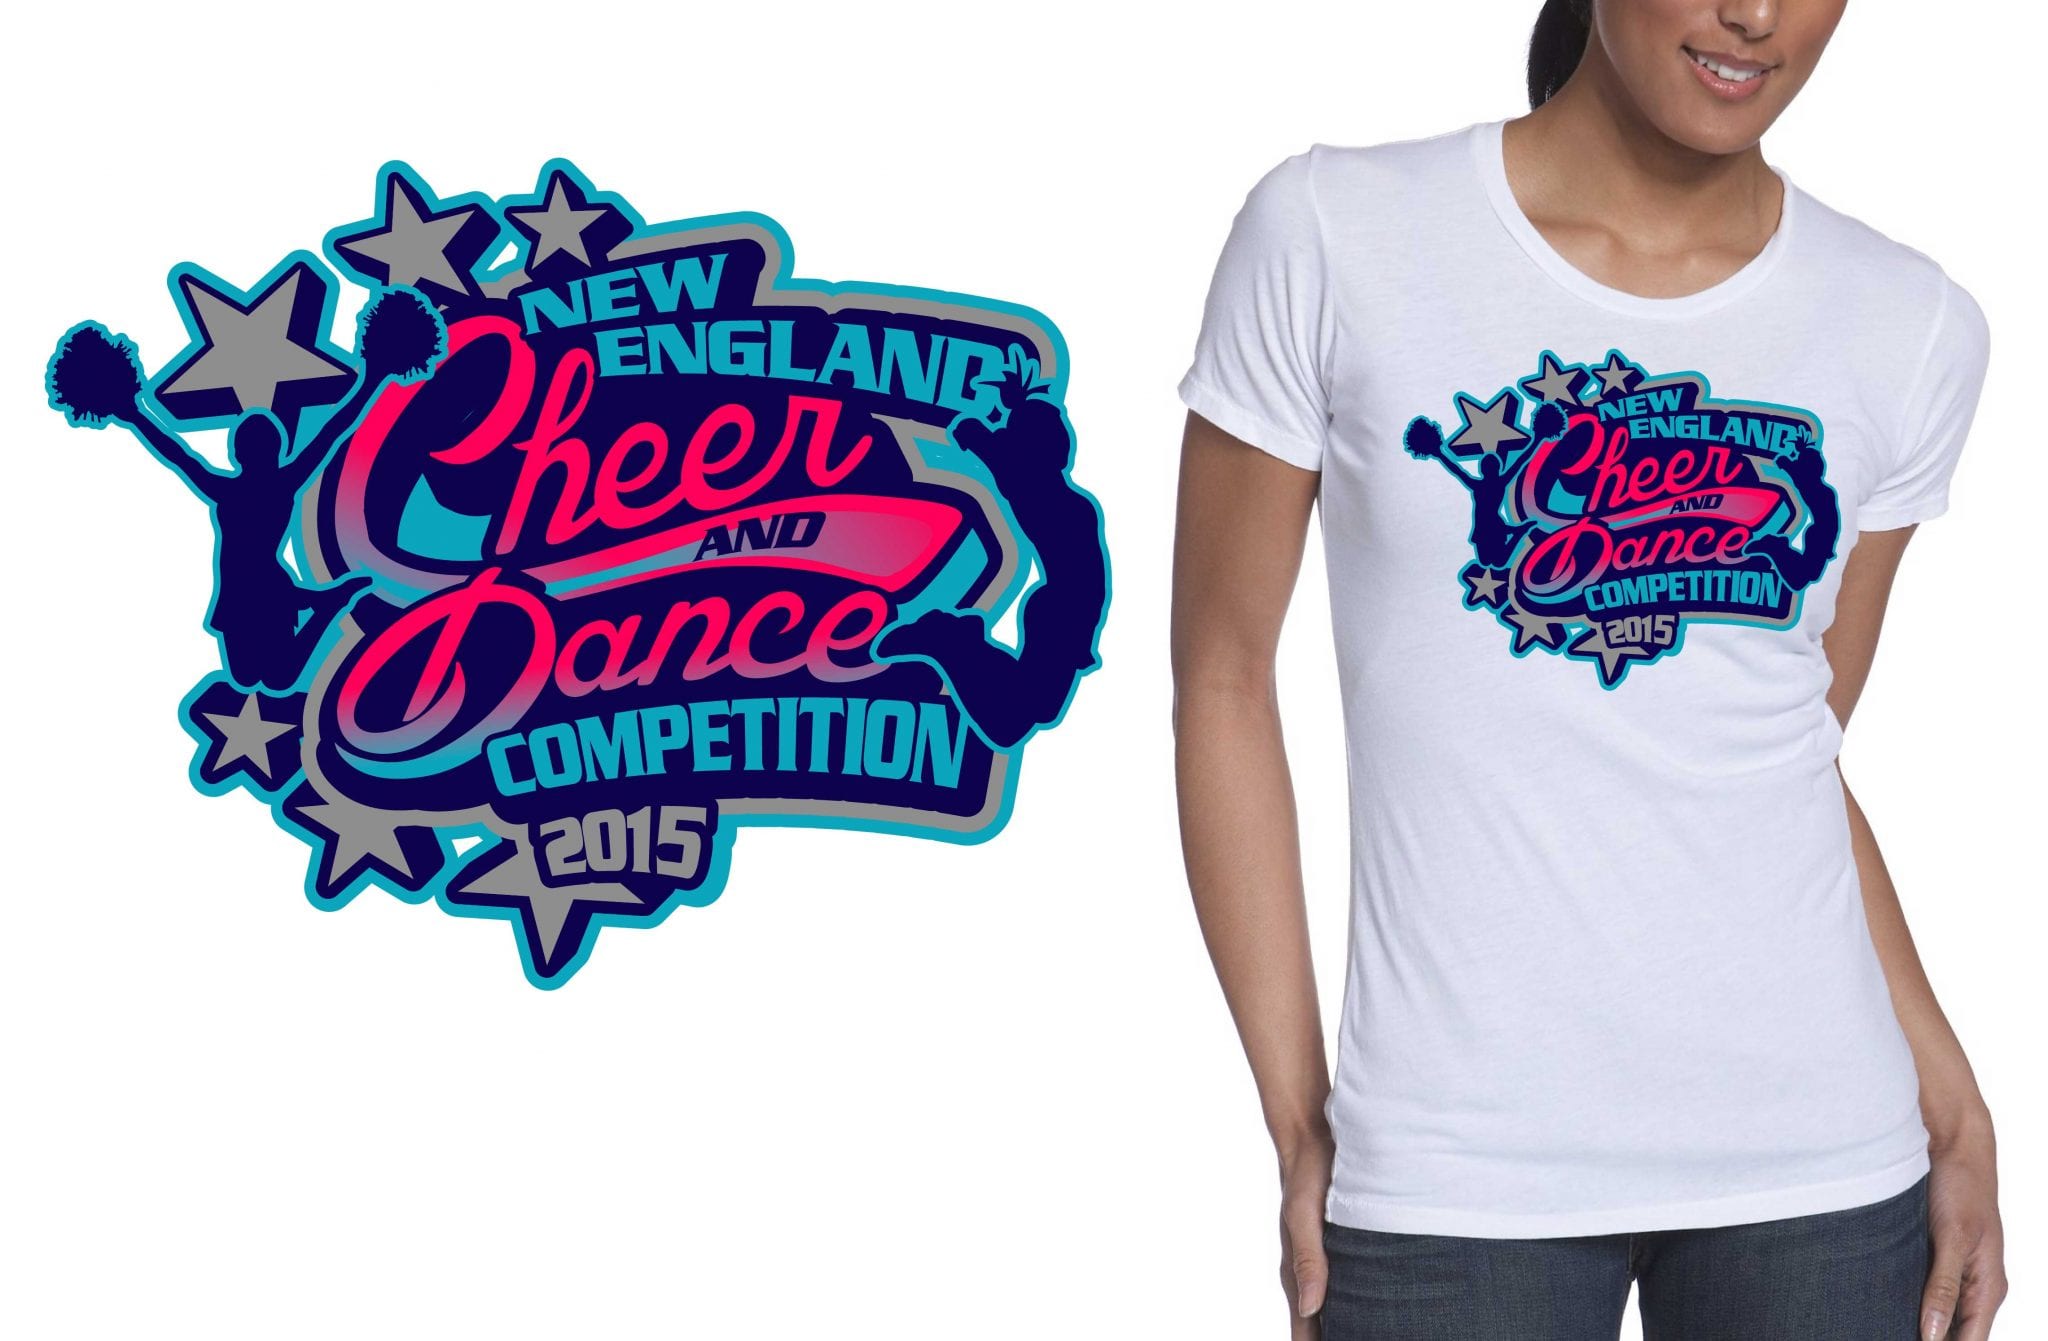 2015 New England Cheer and Dance Competition best tshirt logo design